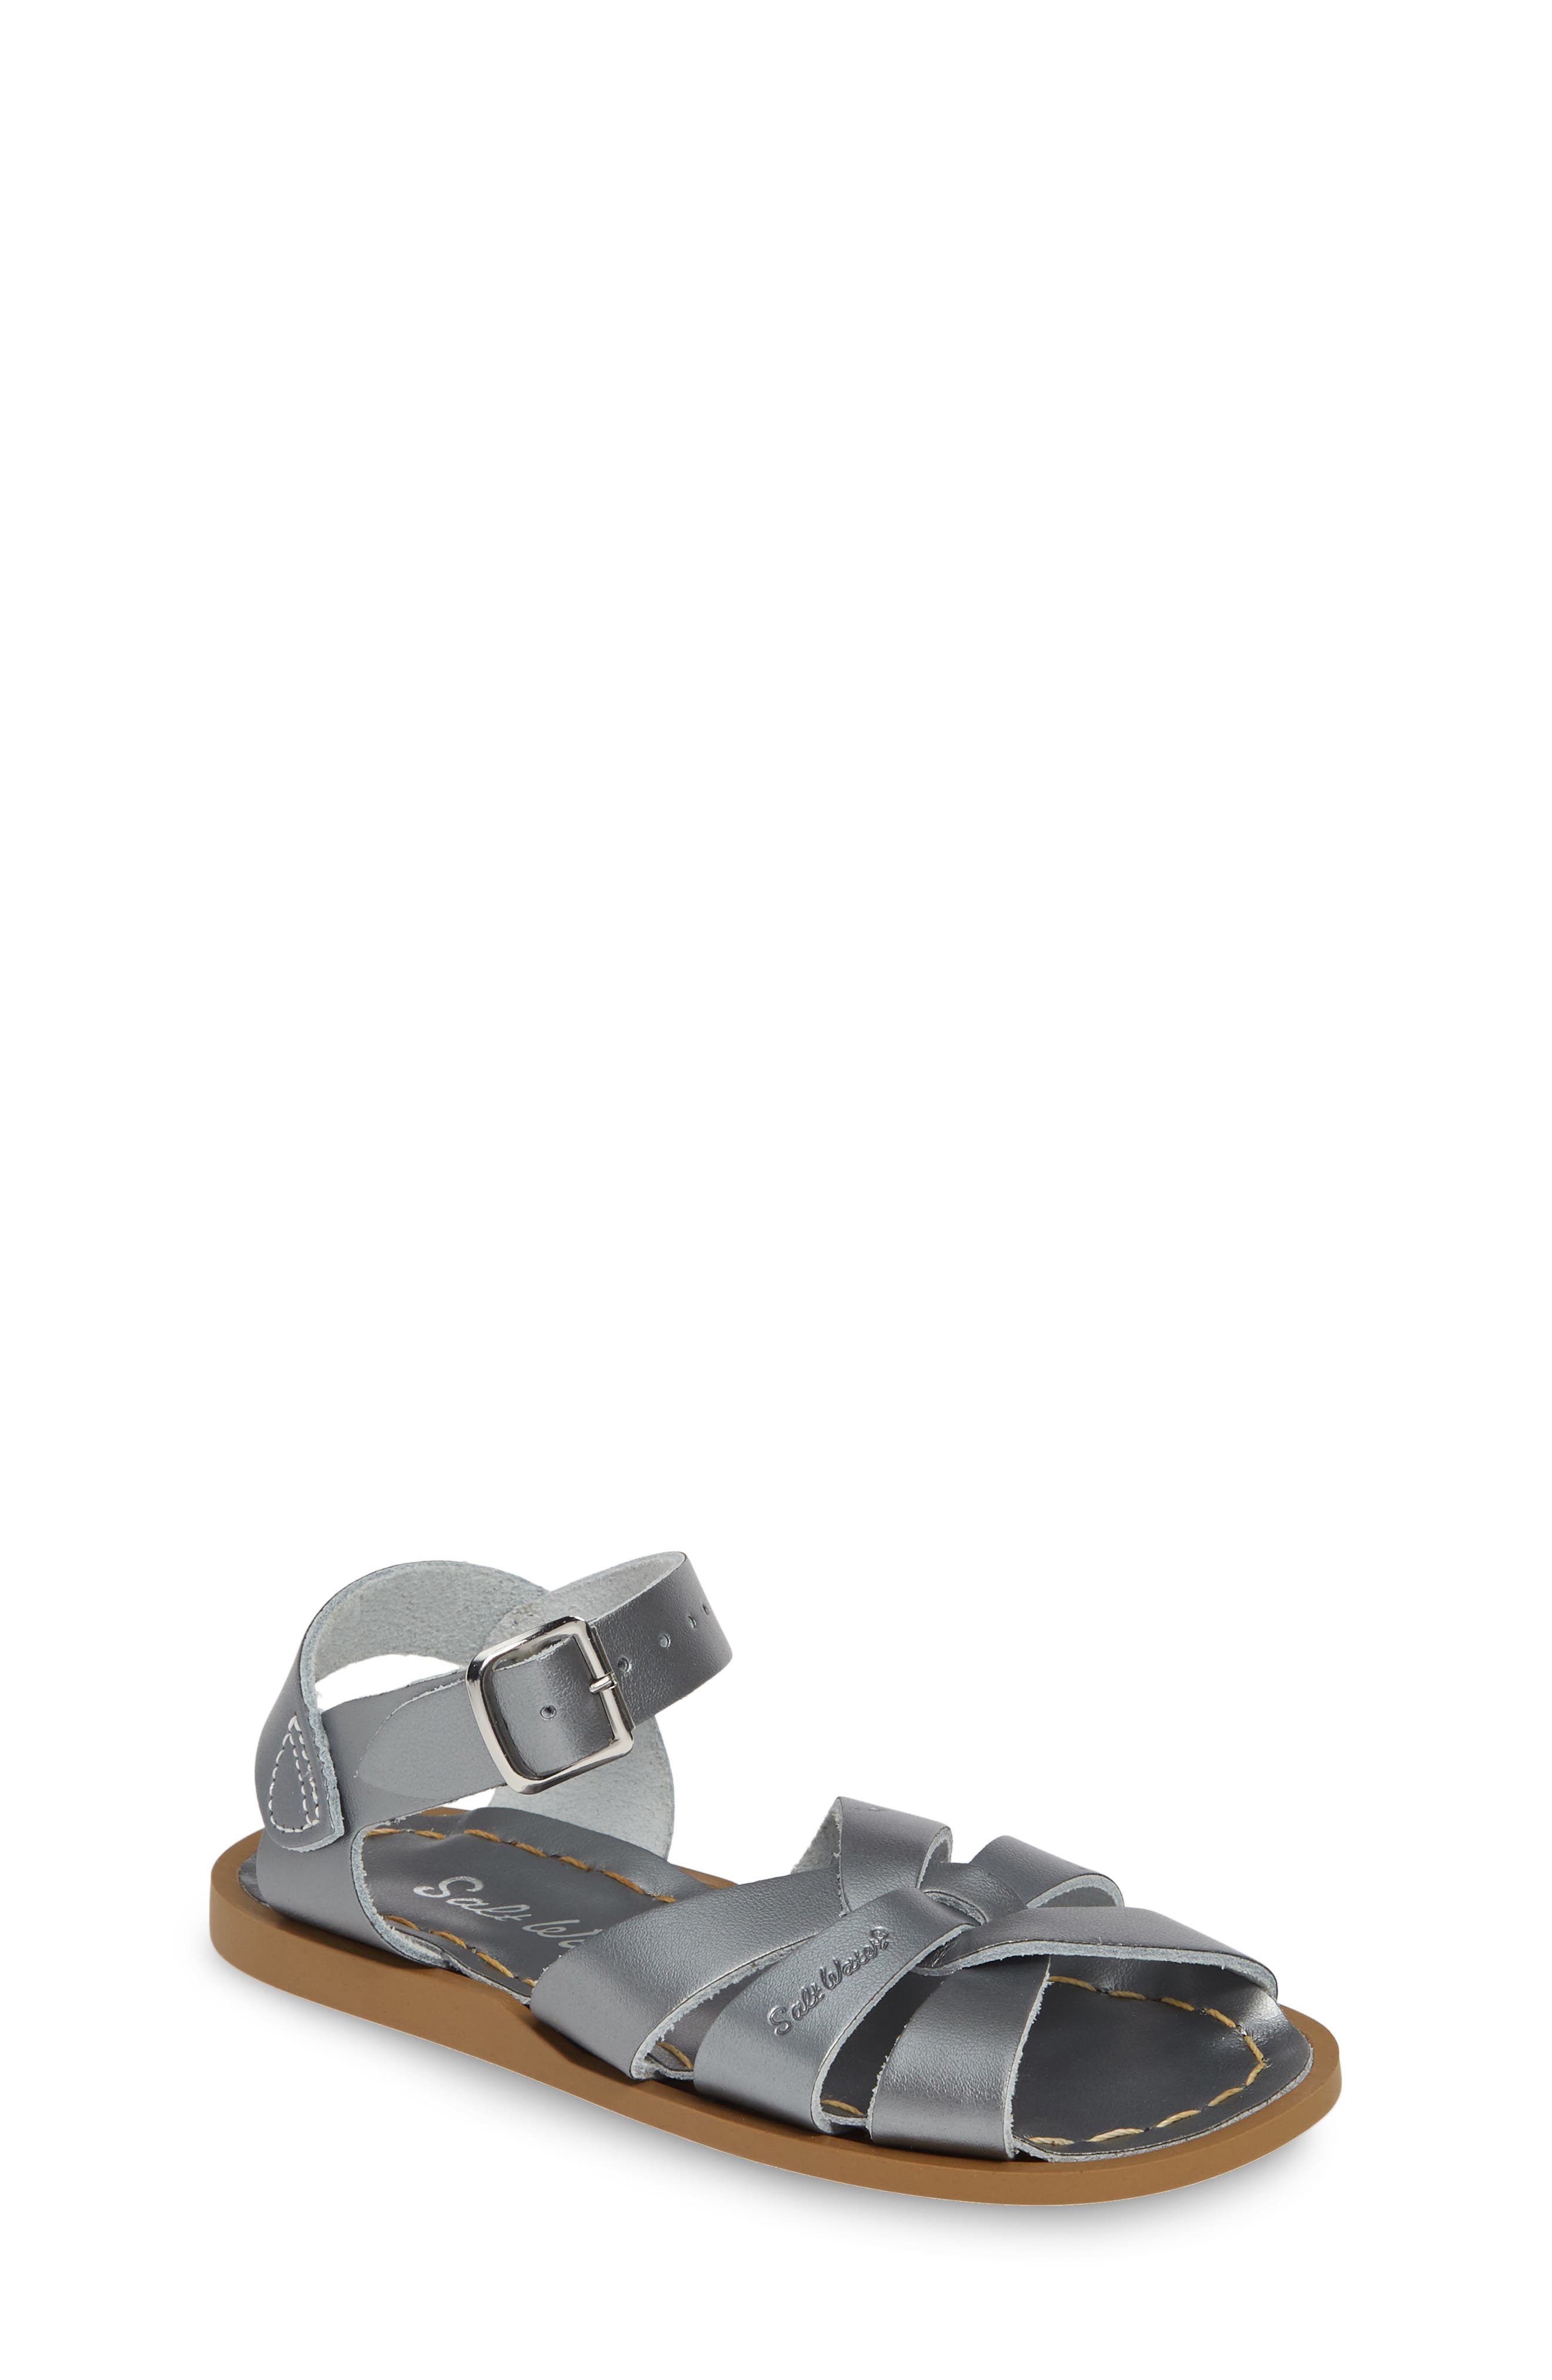 salt water sandal by hoy shoes